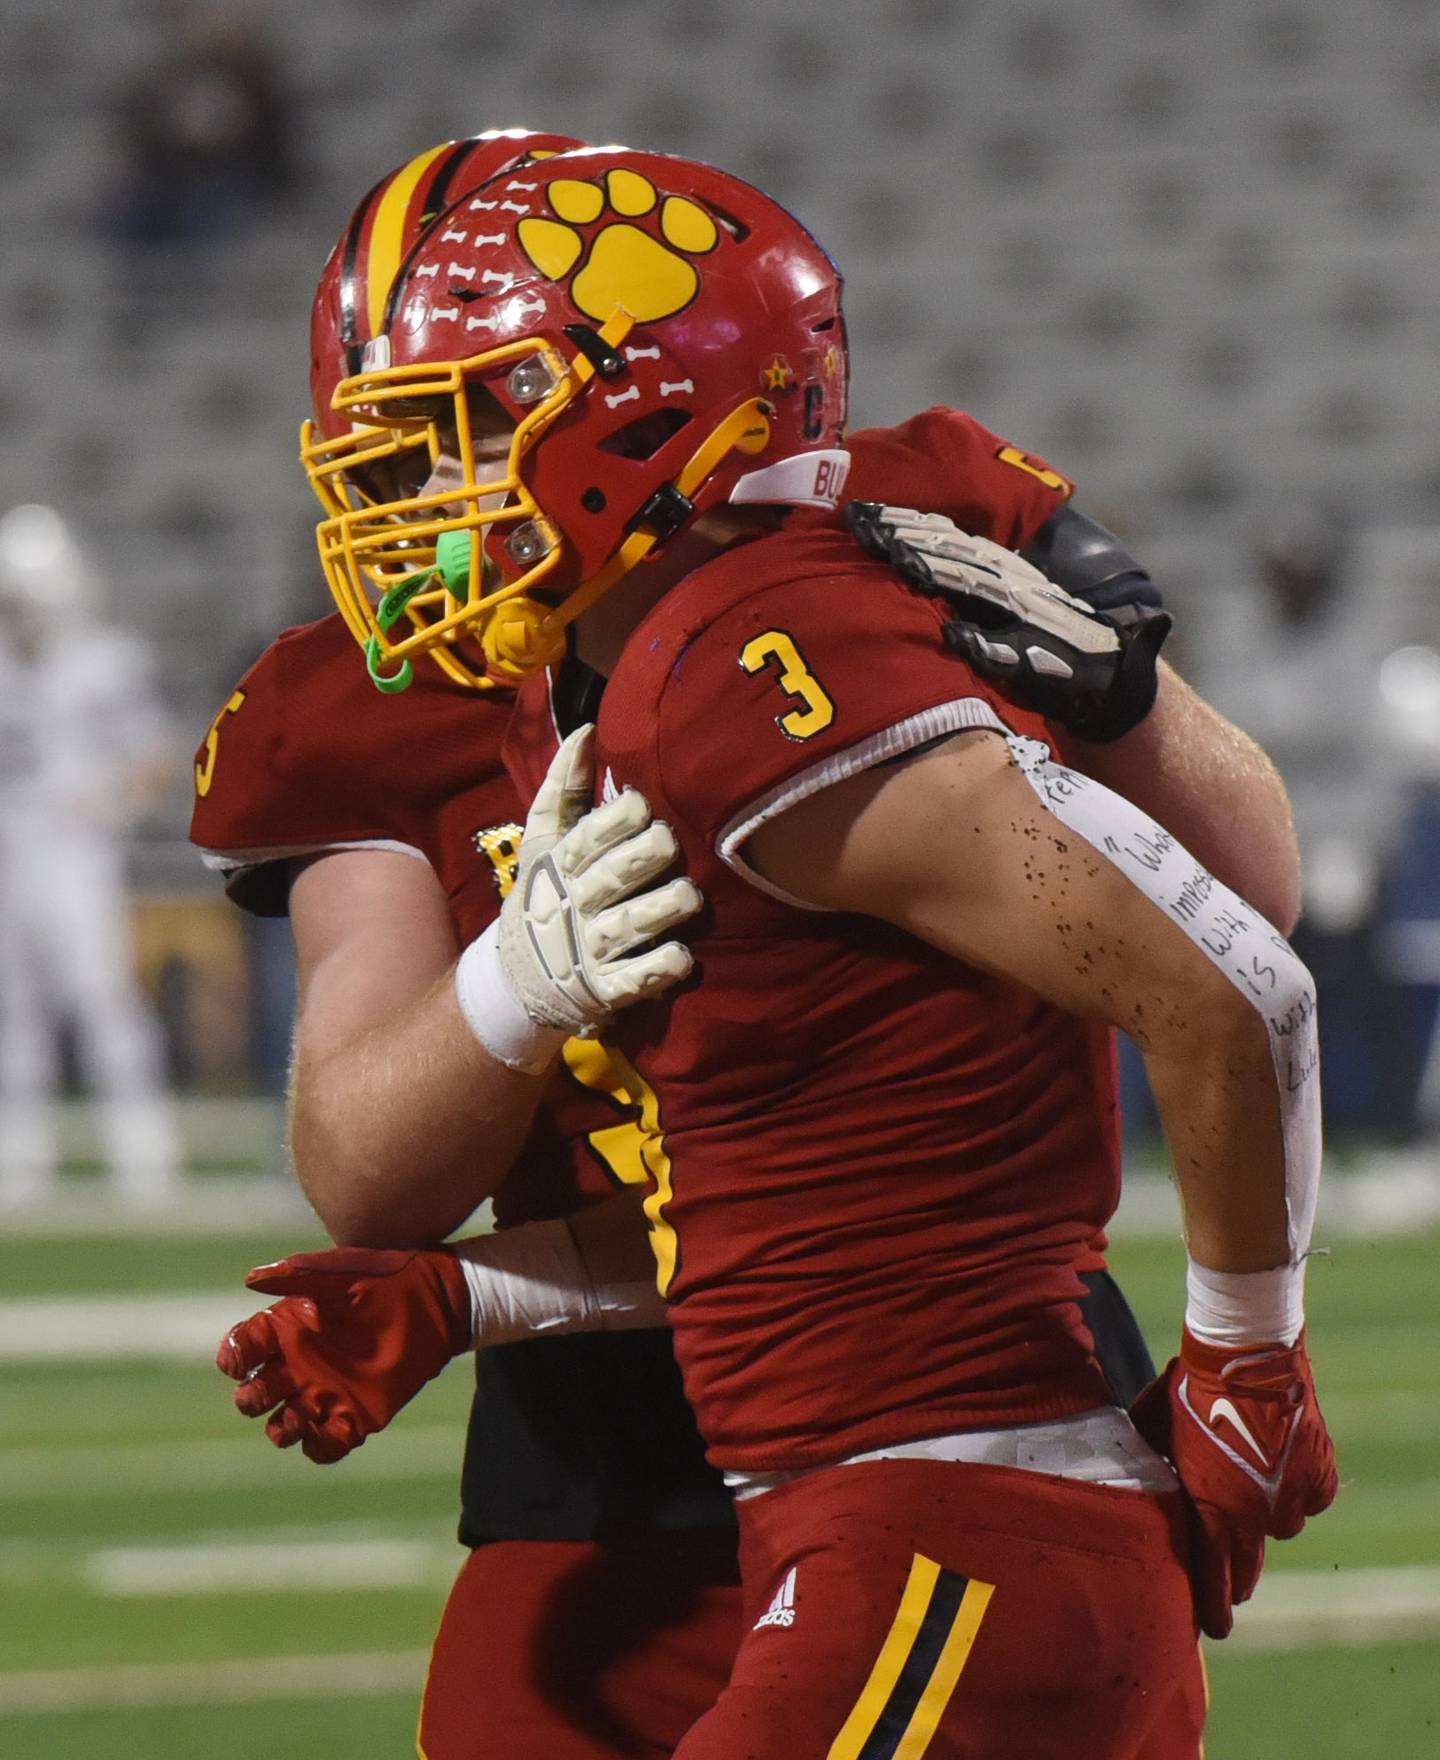 Joe Lewnard/jlewnard@dailyherald.com
Batavia's Ryan Whitwell, right, gets a pat on the chest from teammate Jimmy Zitkus after scoring a second-quarter touchdown during the Class 7A football state title game at Memorial Stadium in Champaign on Saturday, Nov. 26, 2022.